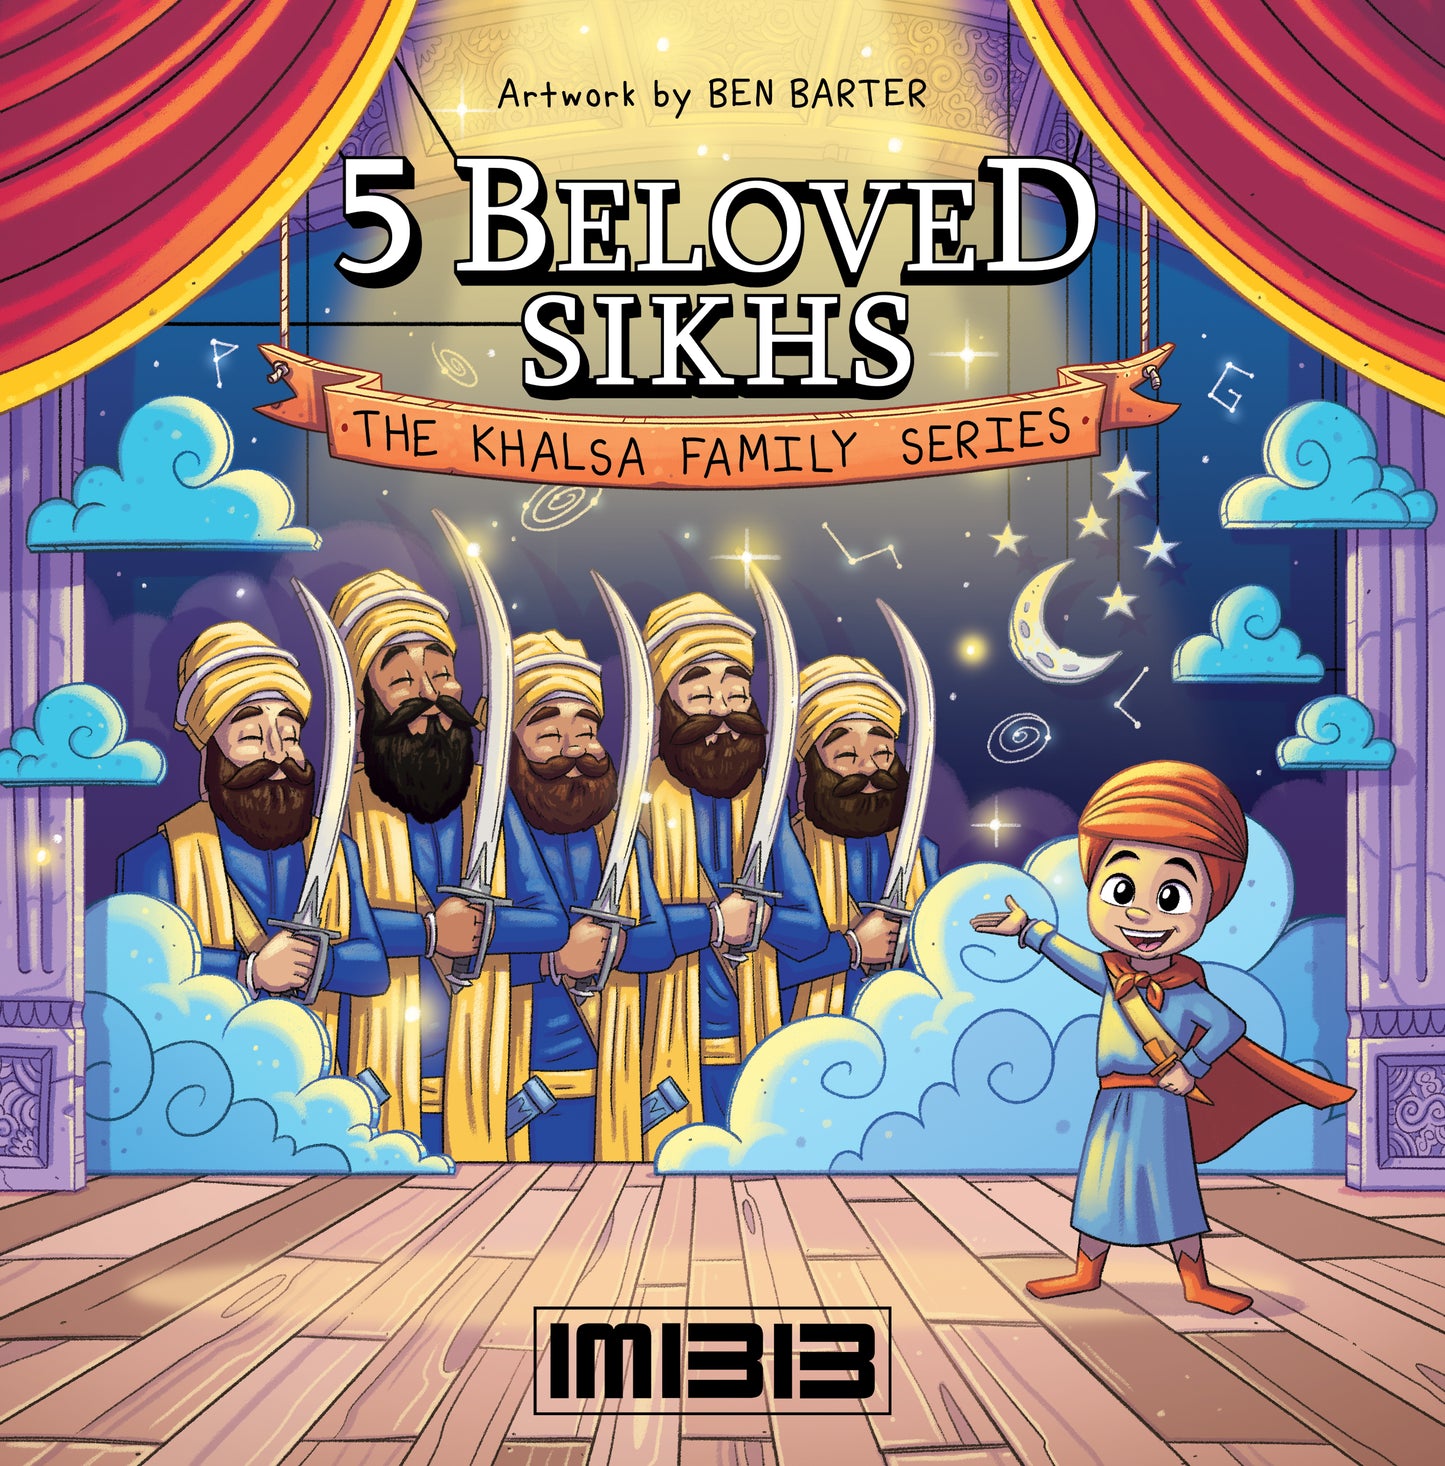 PRE ORDER: The Khalsa Family Series: 5 Beloved Sikhs Book